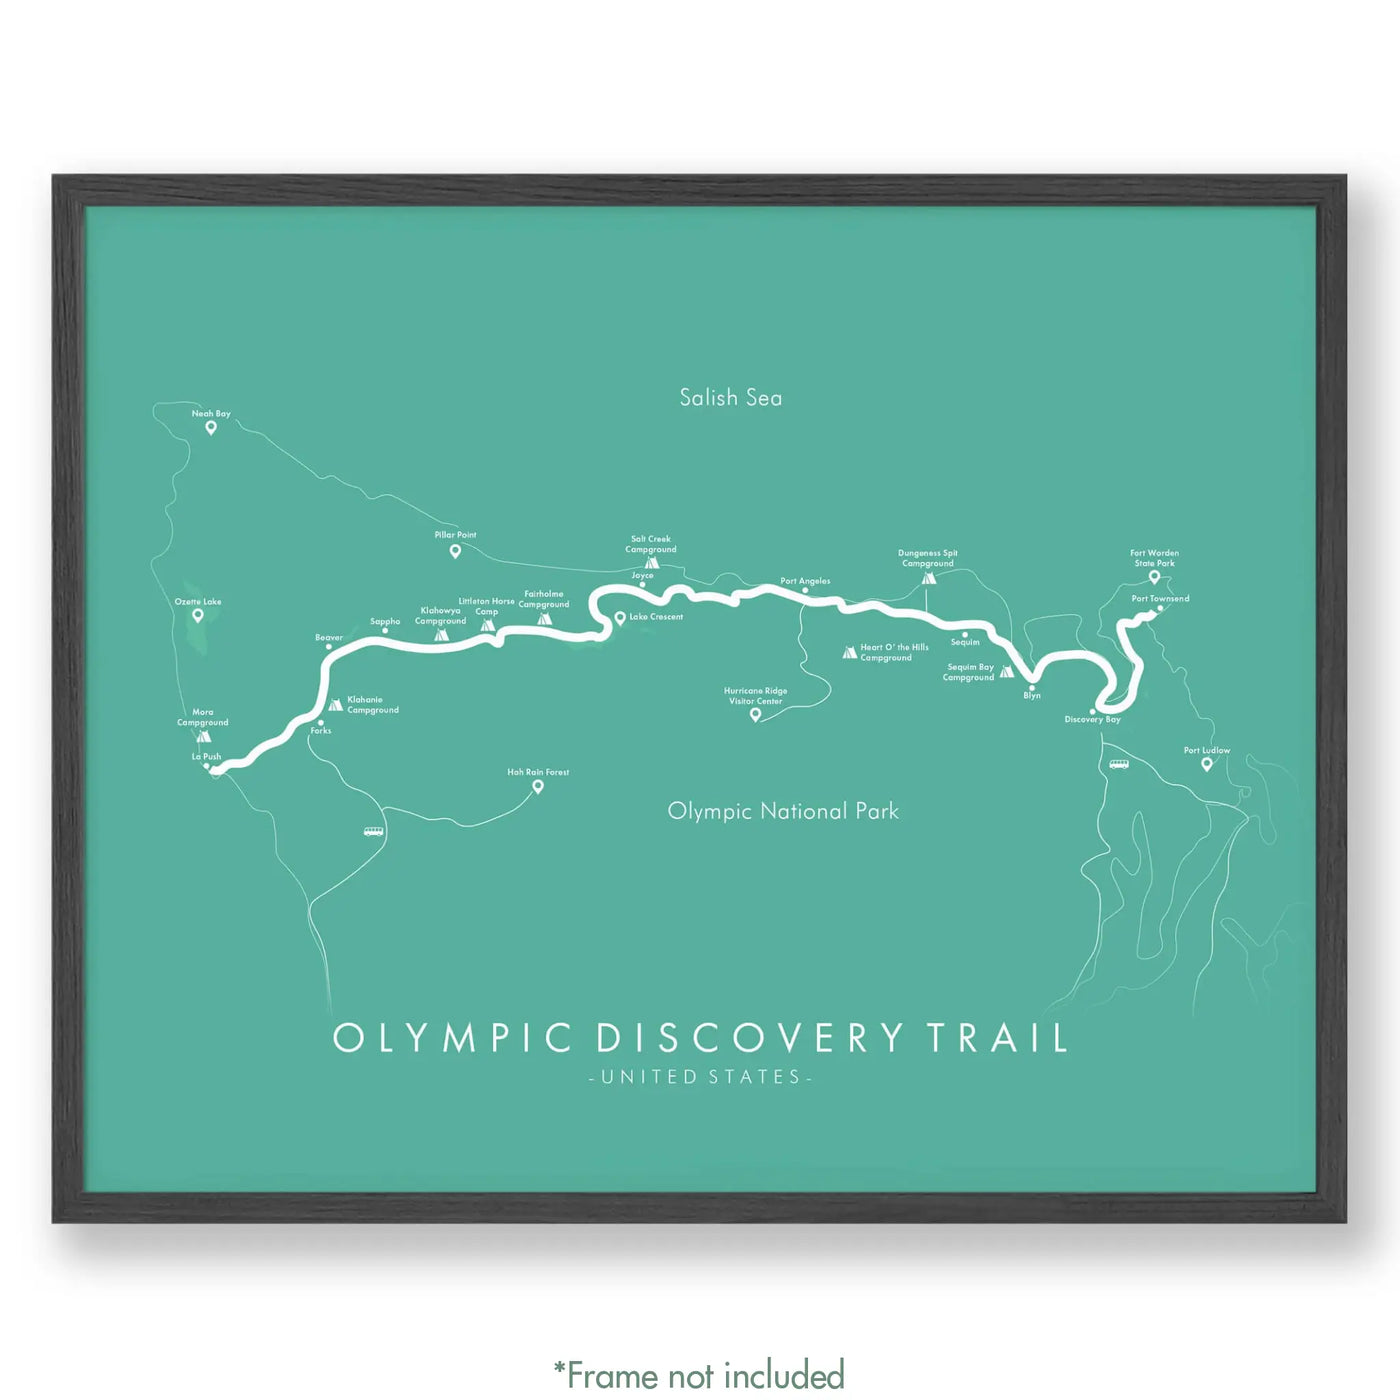 Trail Poster of Olympic Discovery Trail - Teal